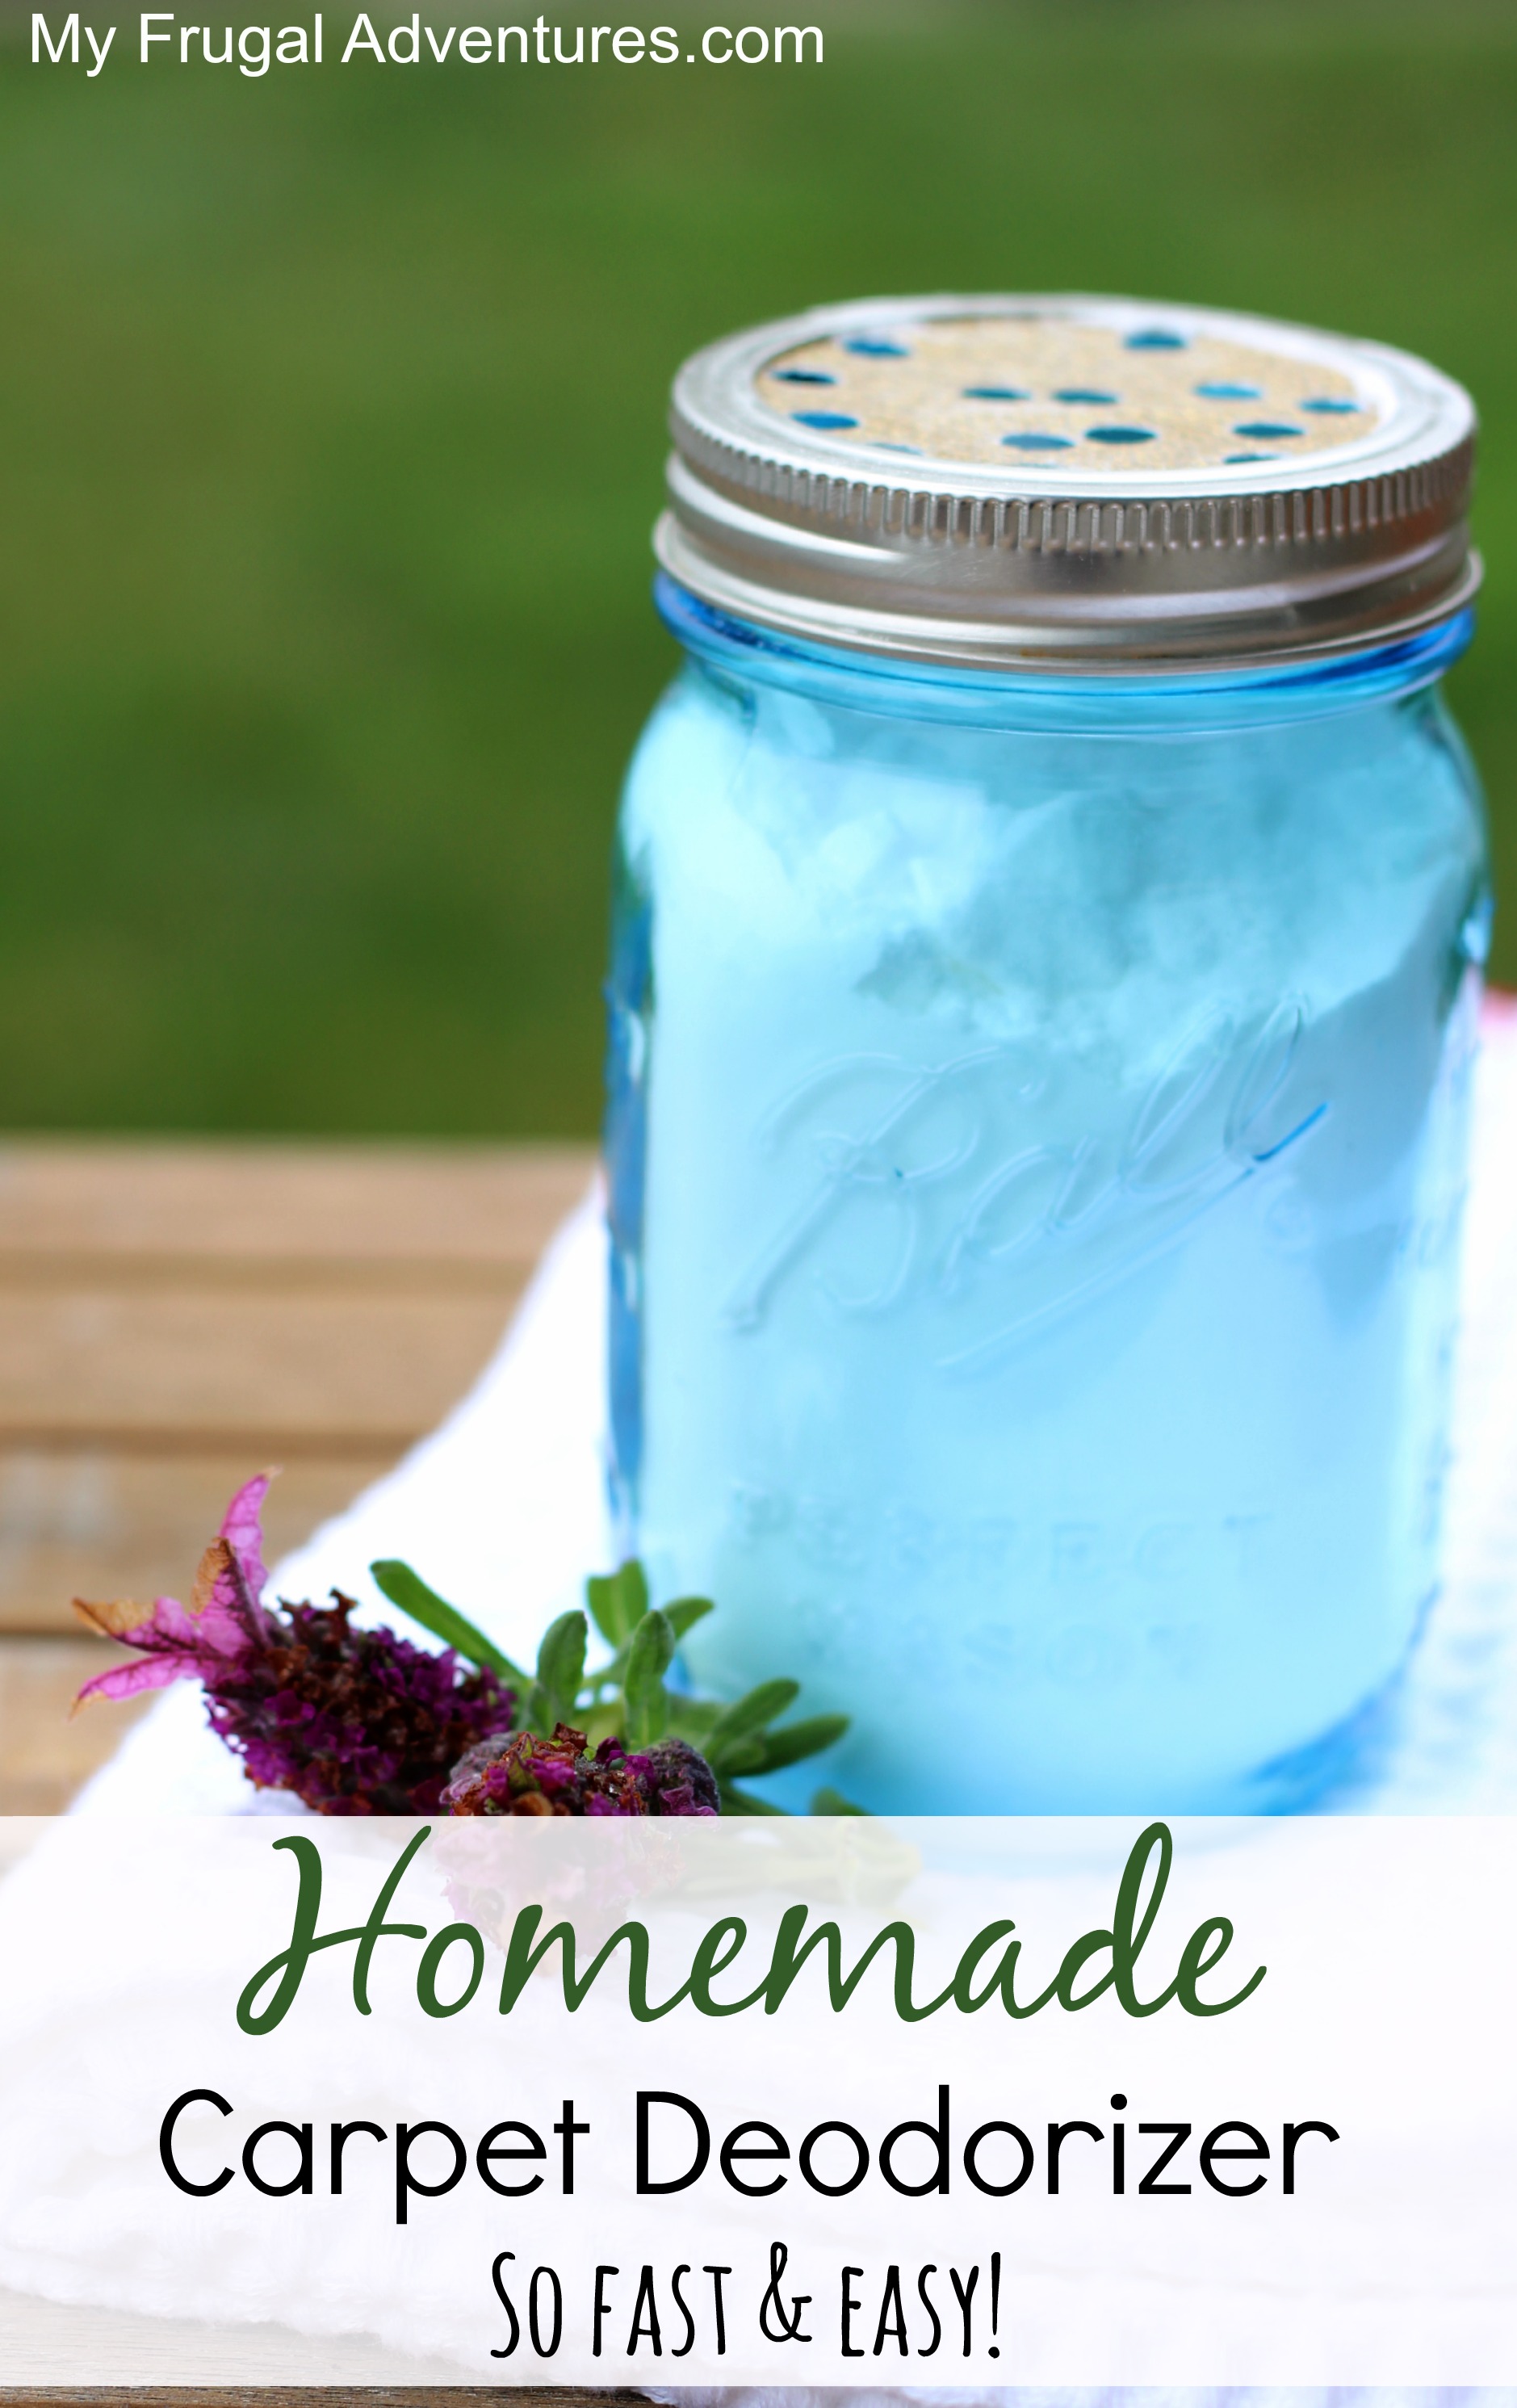 https://myfrugaladventures.com/wp-content/uploads/2012/05/How-to-make-homemade-carpet-deodorizer-so-fast-easy-and-leaves-the-house-smelling-incredibly-fresh.jpg